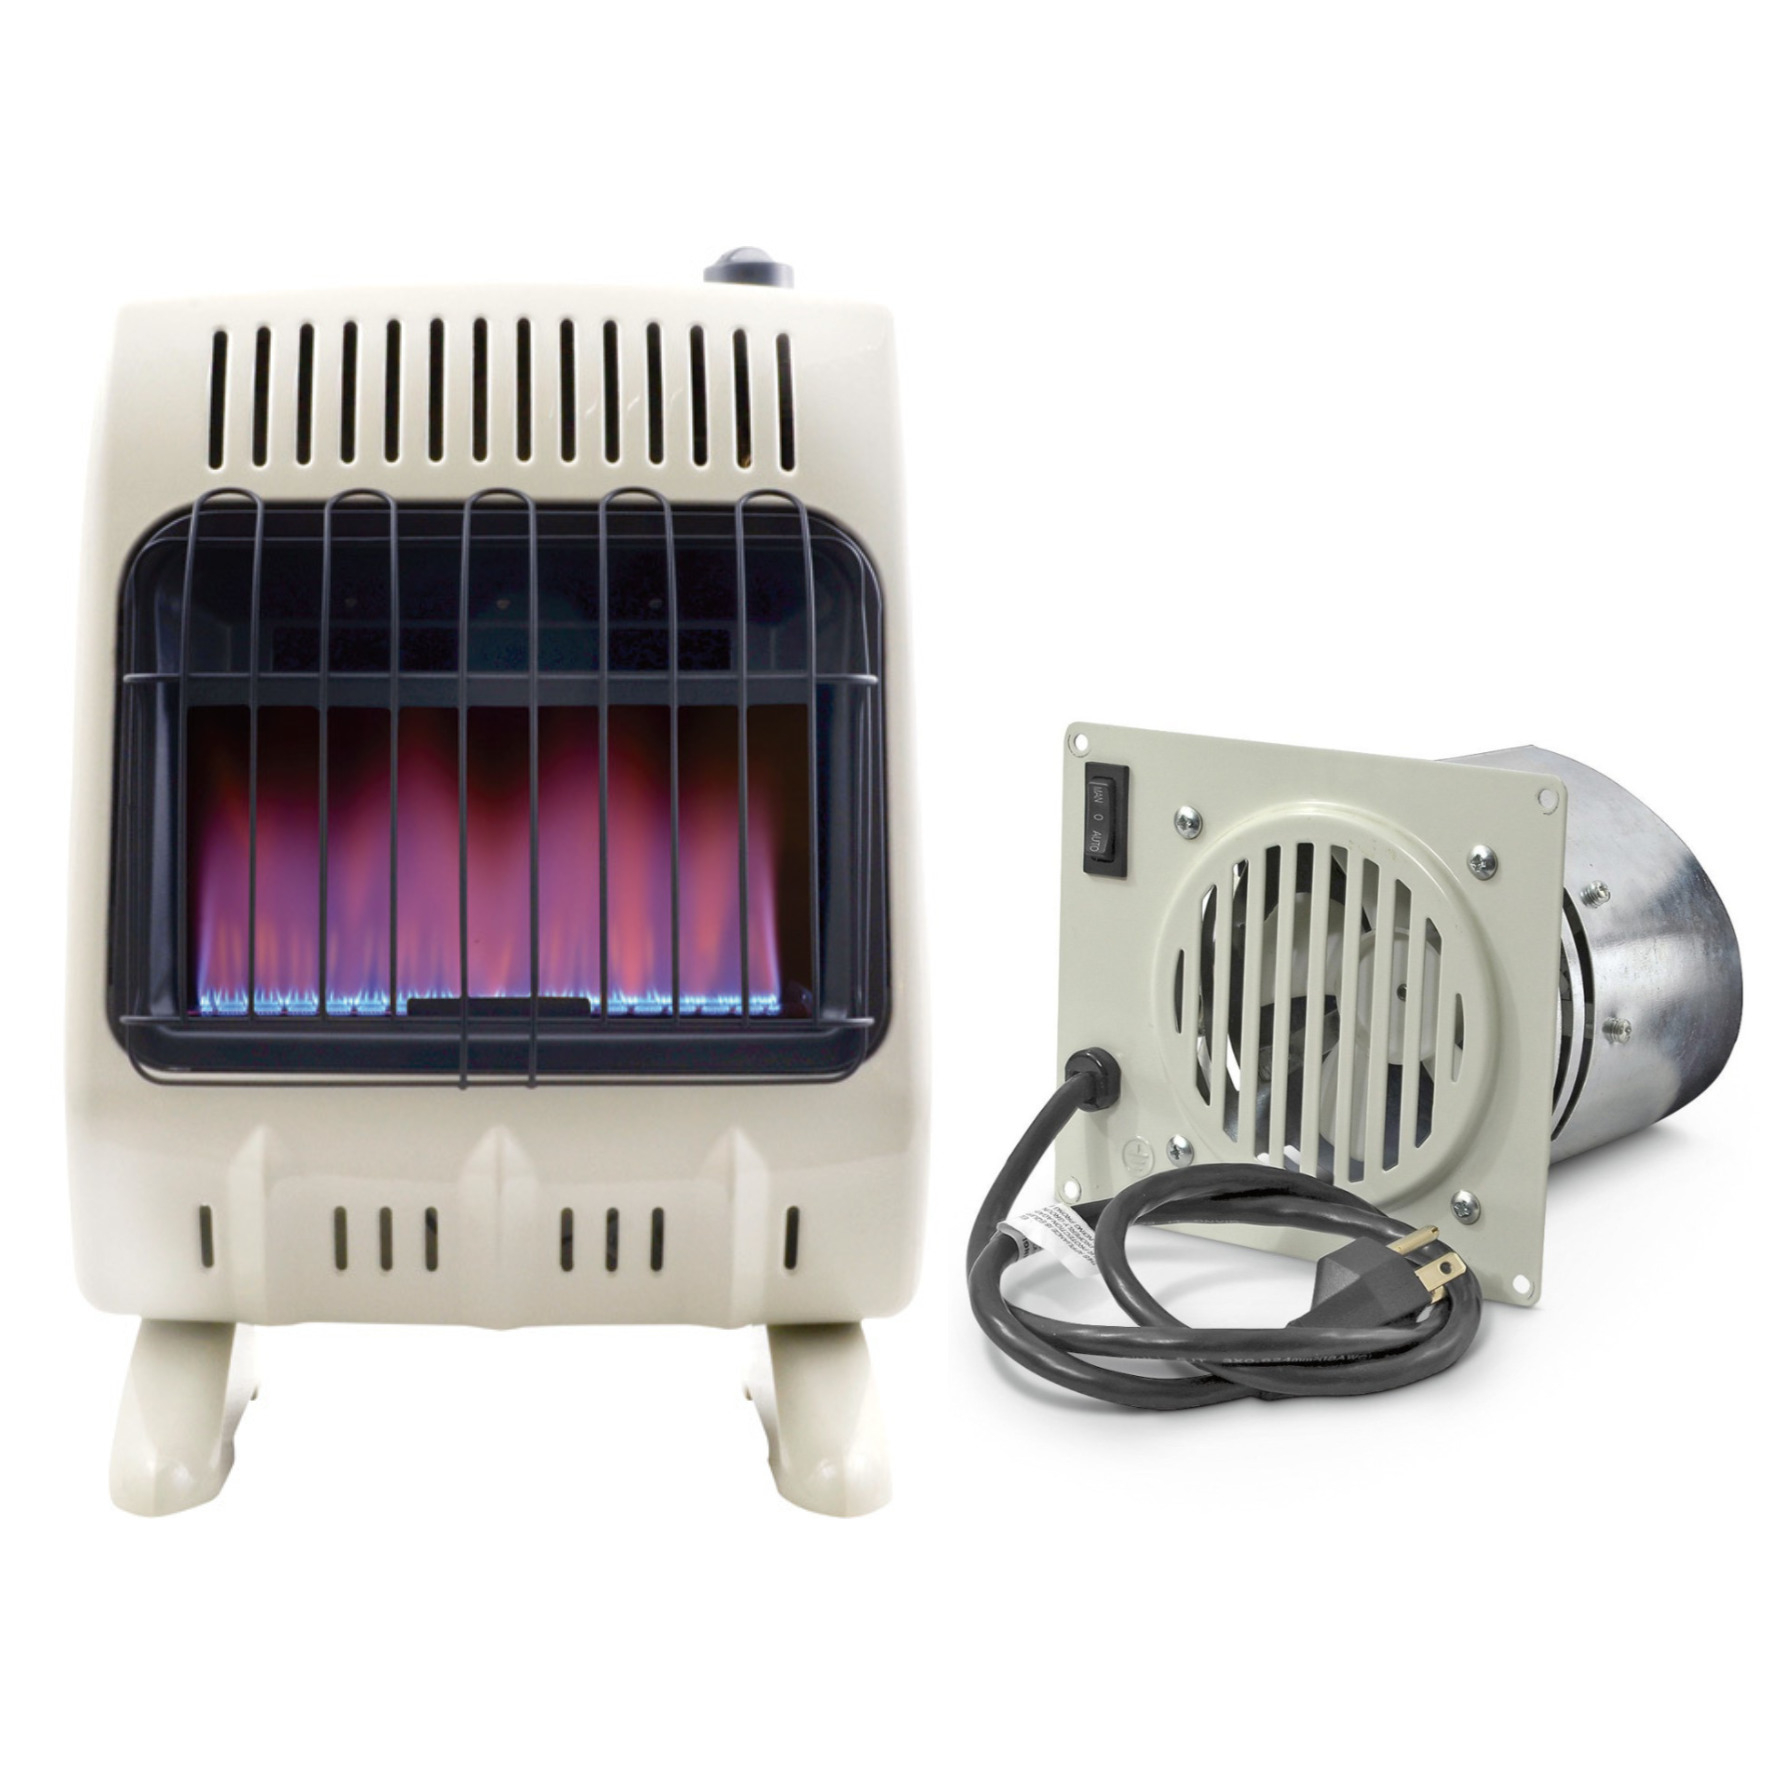 Mr Heater 20000 Btu Vent Free Blue Flame Natural Gas Heater Wblower Walmart for proportions 1791 X 1791